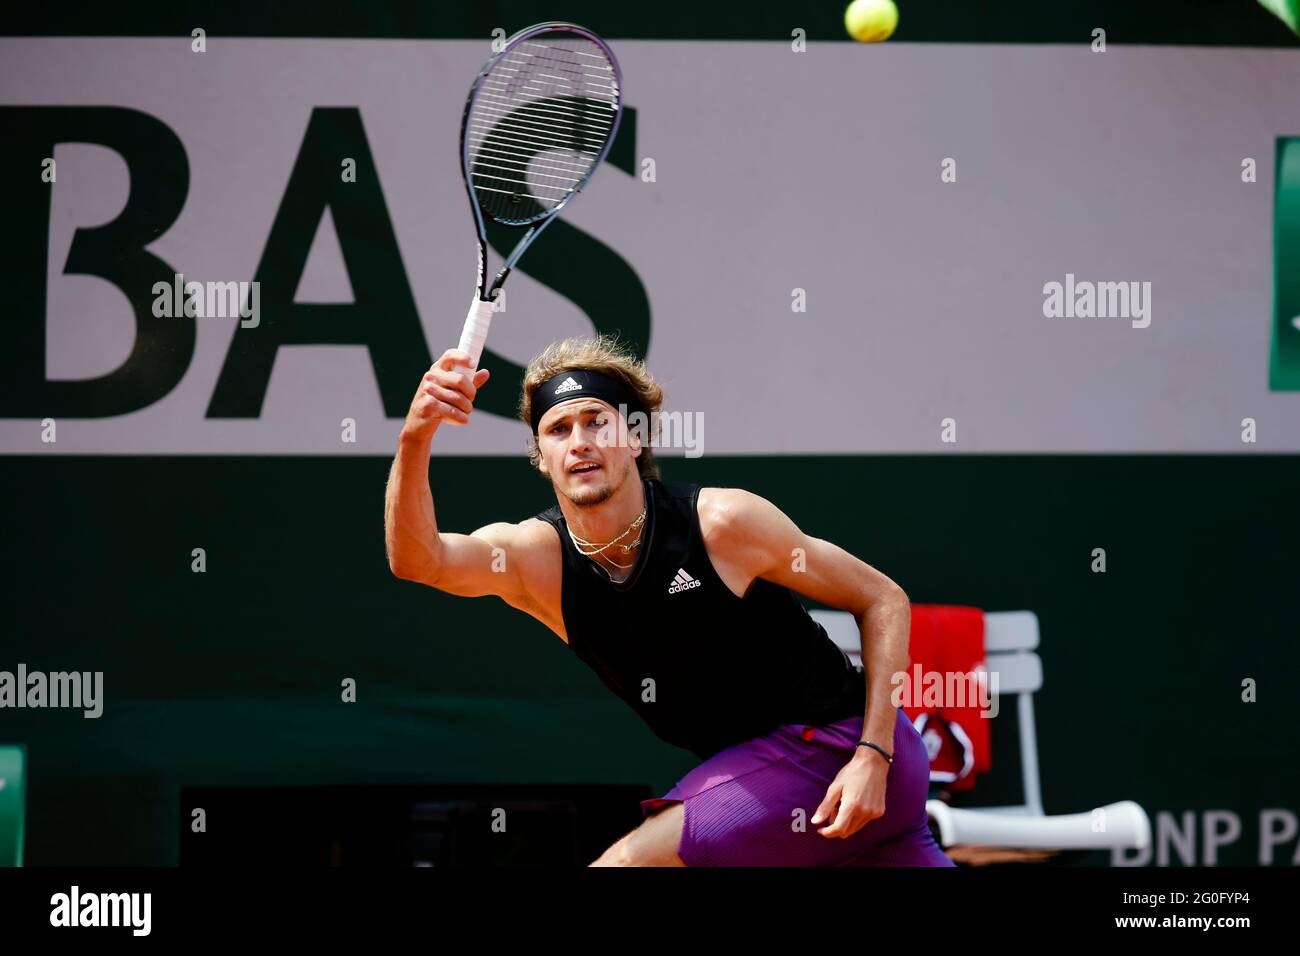 Paris, France. 2nd June, 2021. Alexander Zverev from Germany is in action at the 2021 French Open Grand Slam tennis tournament in Roland Garros, Paris, France. Frank Molter/Alamy Live news Stock Photo